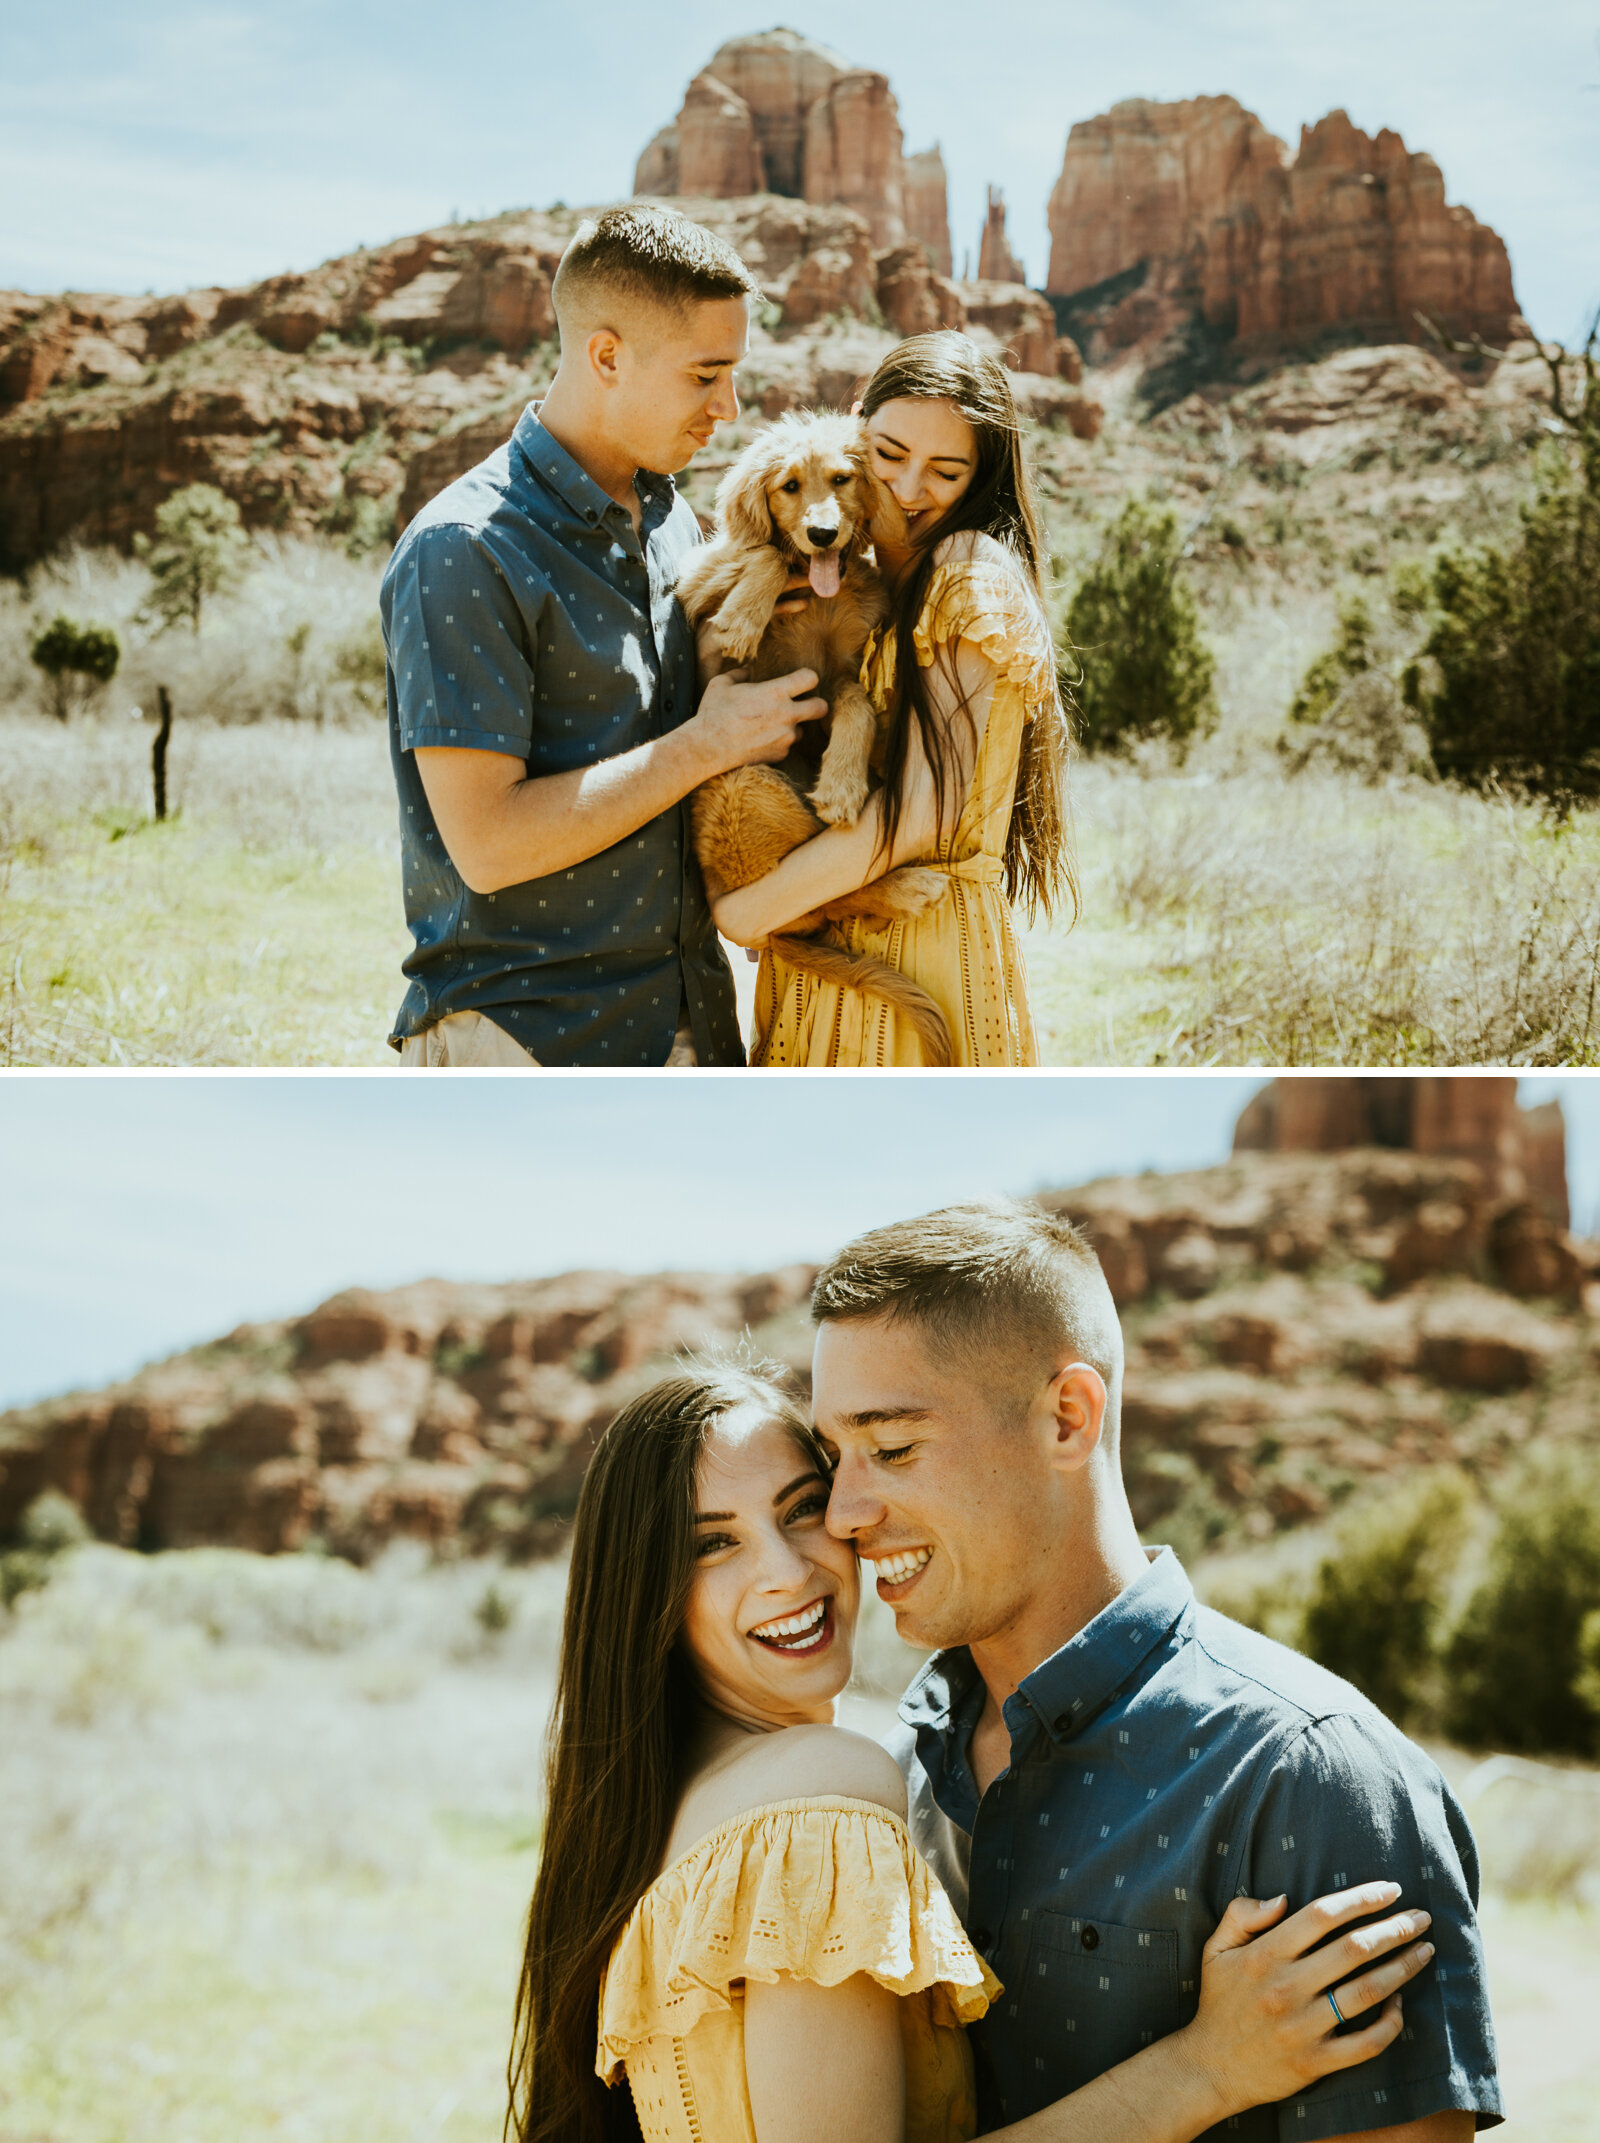 red rock crossing sedona arizona cathedral rock crescent moon ranch couple photos engagement photo outfit inspiration couple posing ideas midday photos anniversary photos goldendoodle dog puppy couple photos.jpg